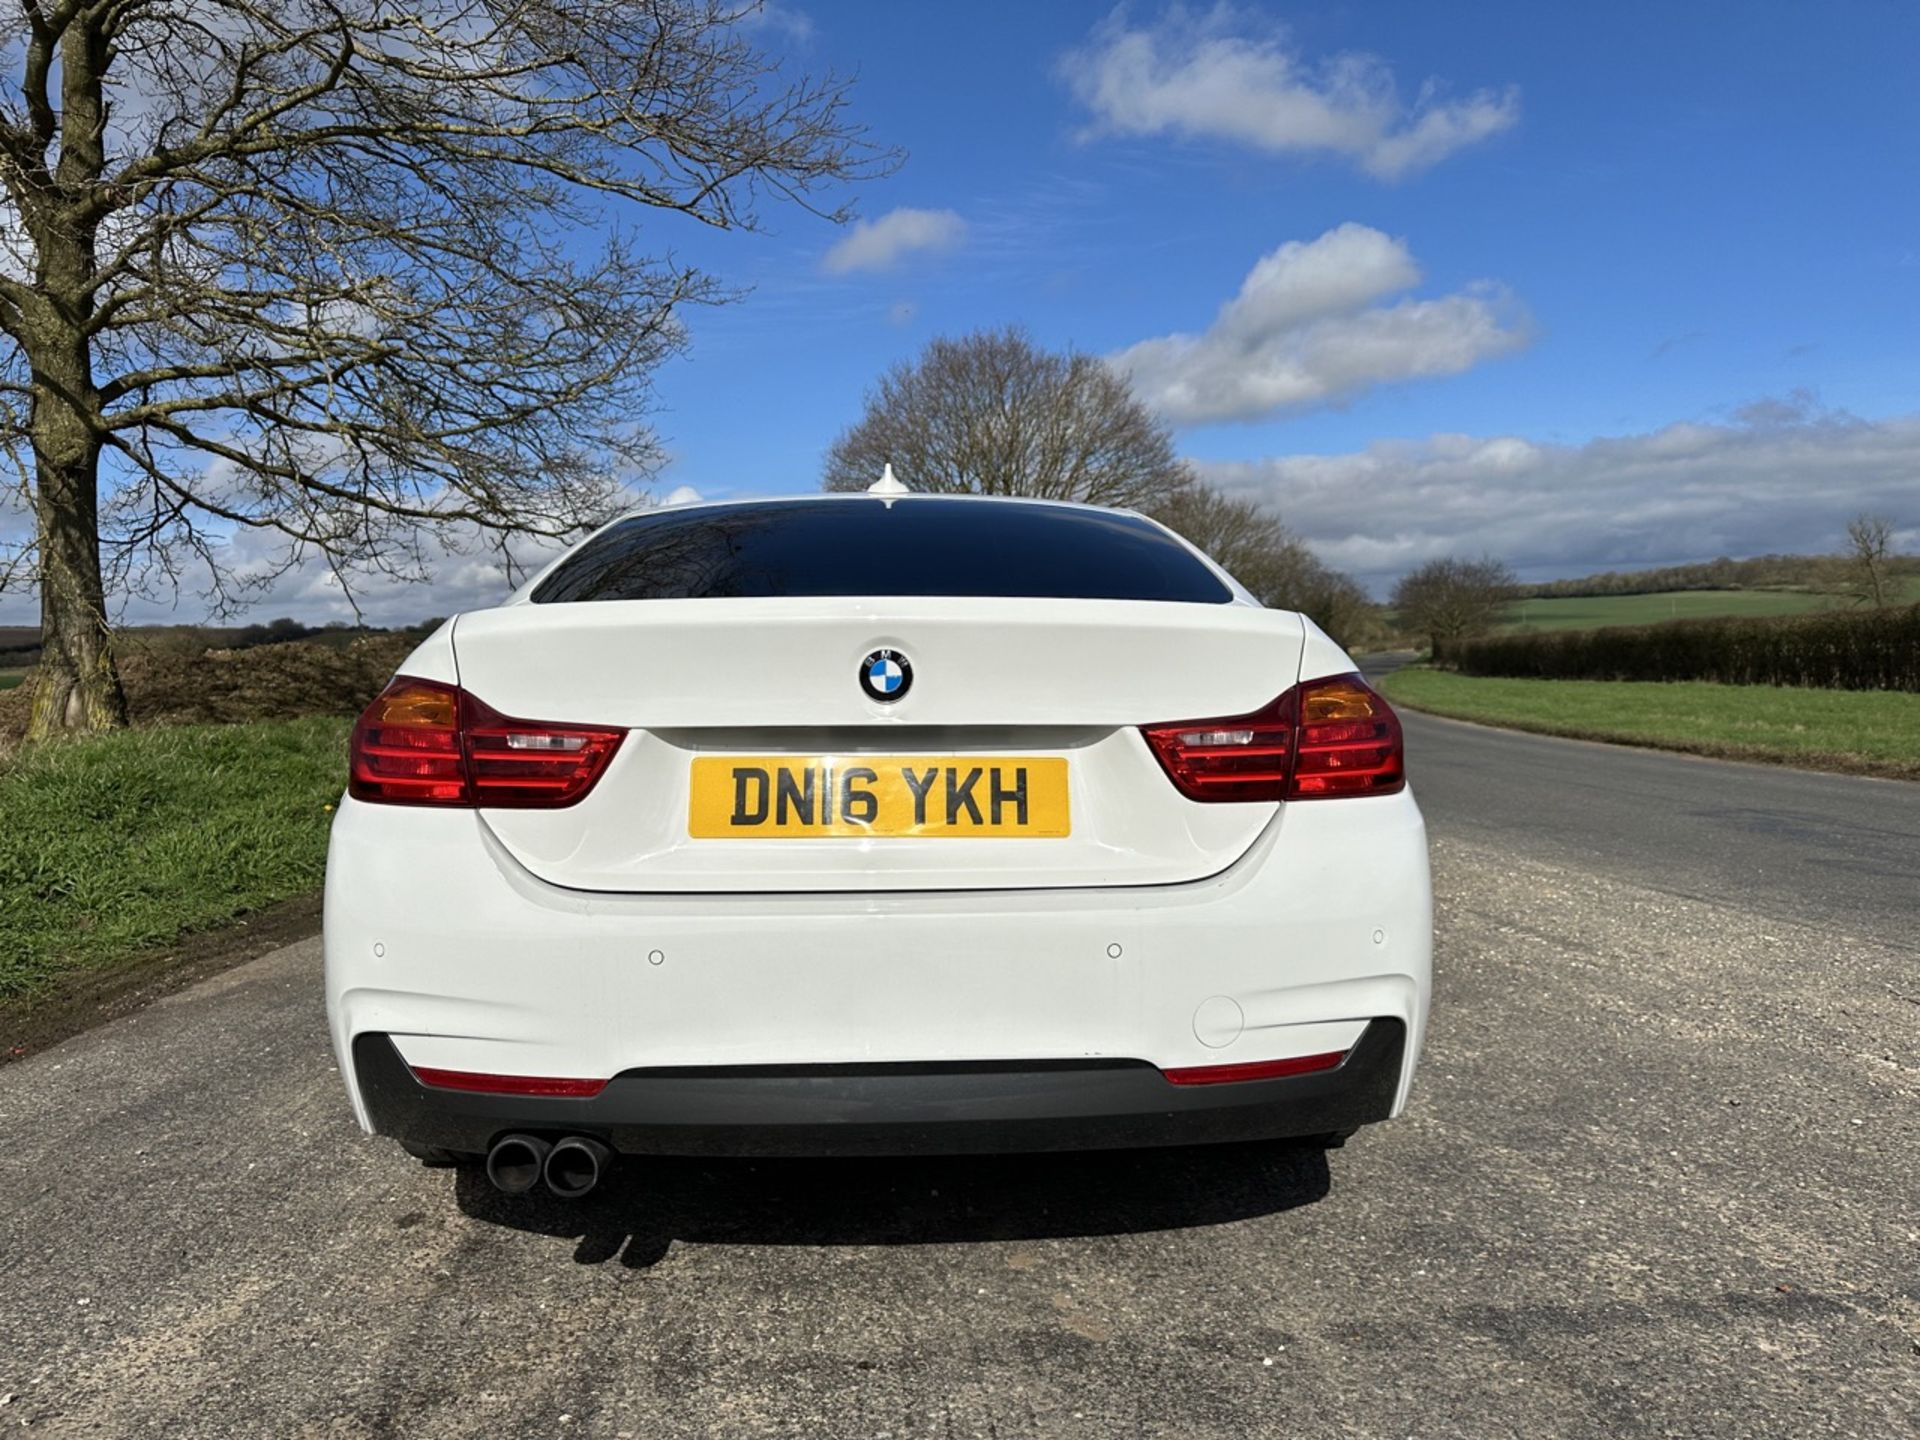 BMW 4 SERIES 420i M Sport 5dr [Professional Media] Manual - Petrol - 2.0 - Coupe- 54k miles - 2016 - Image 4 of 13